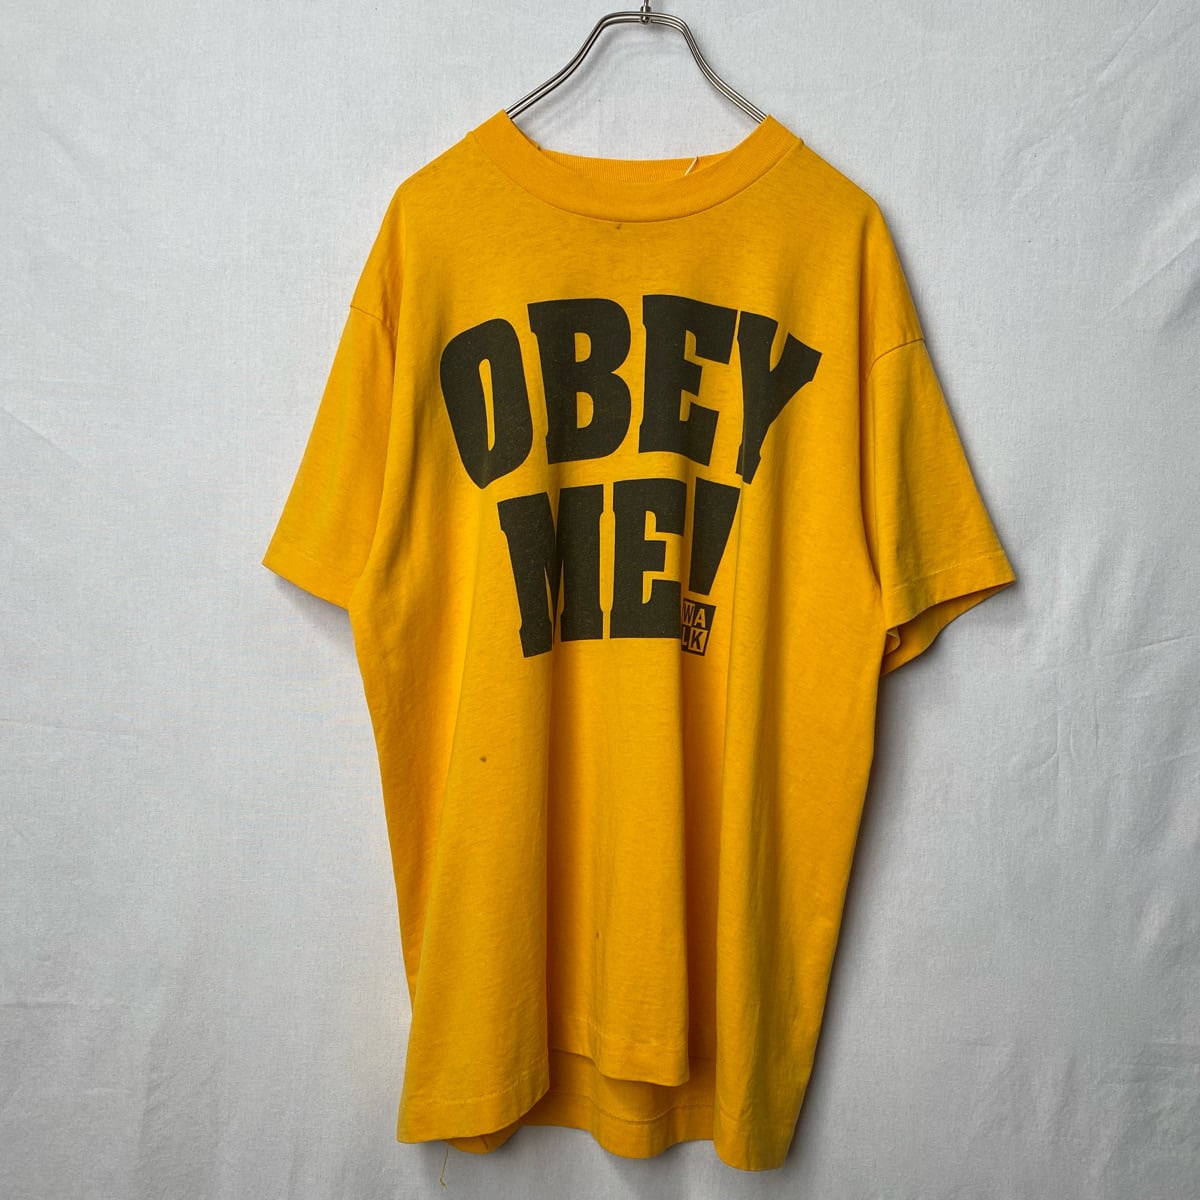 90s OBEY ME! メッセージTシャツ 古着 黄 イエロー ロゴ プリント USA ...